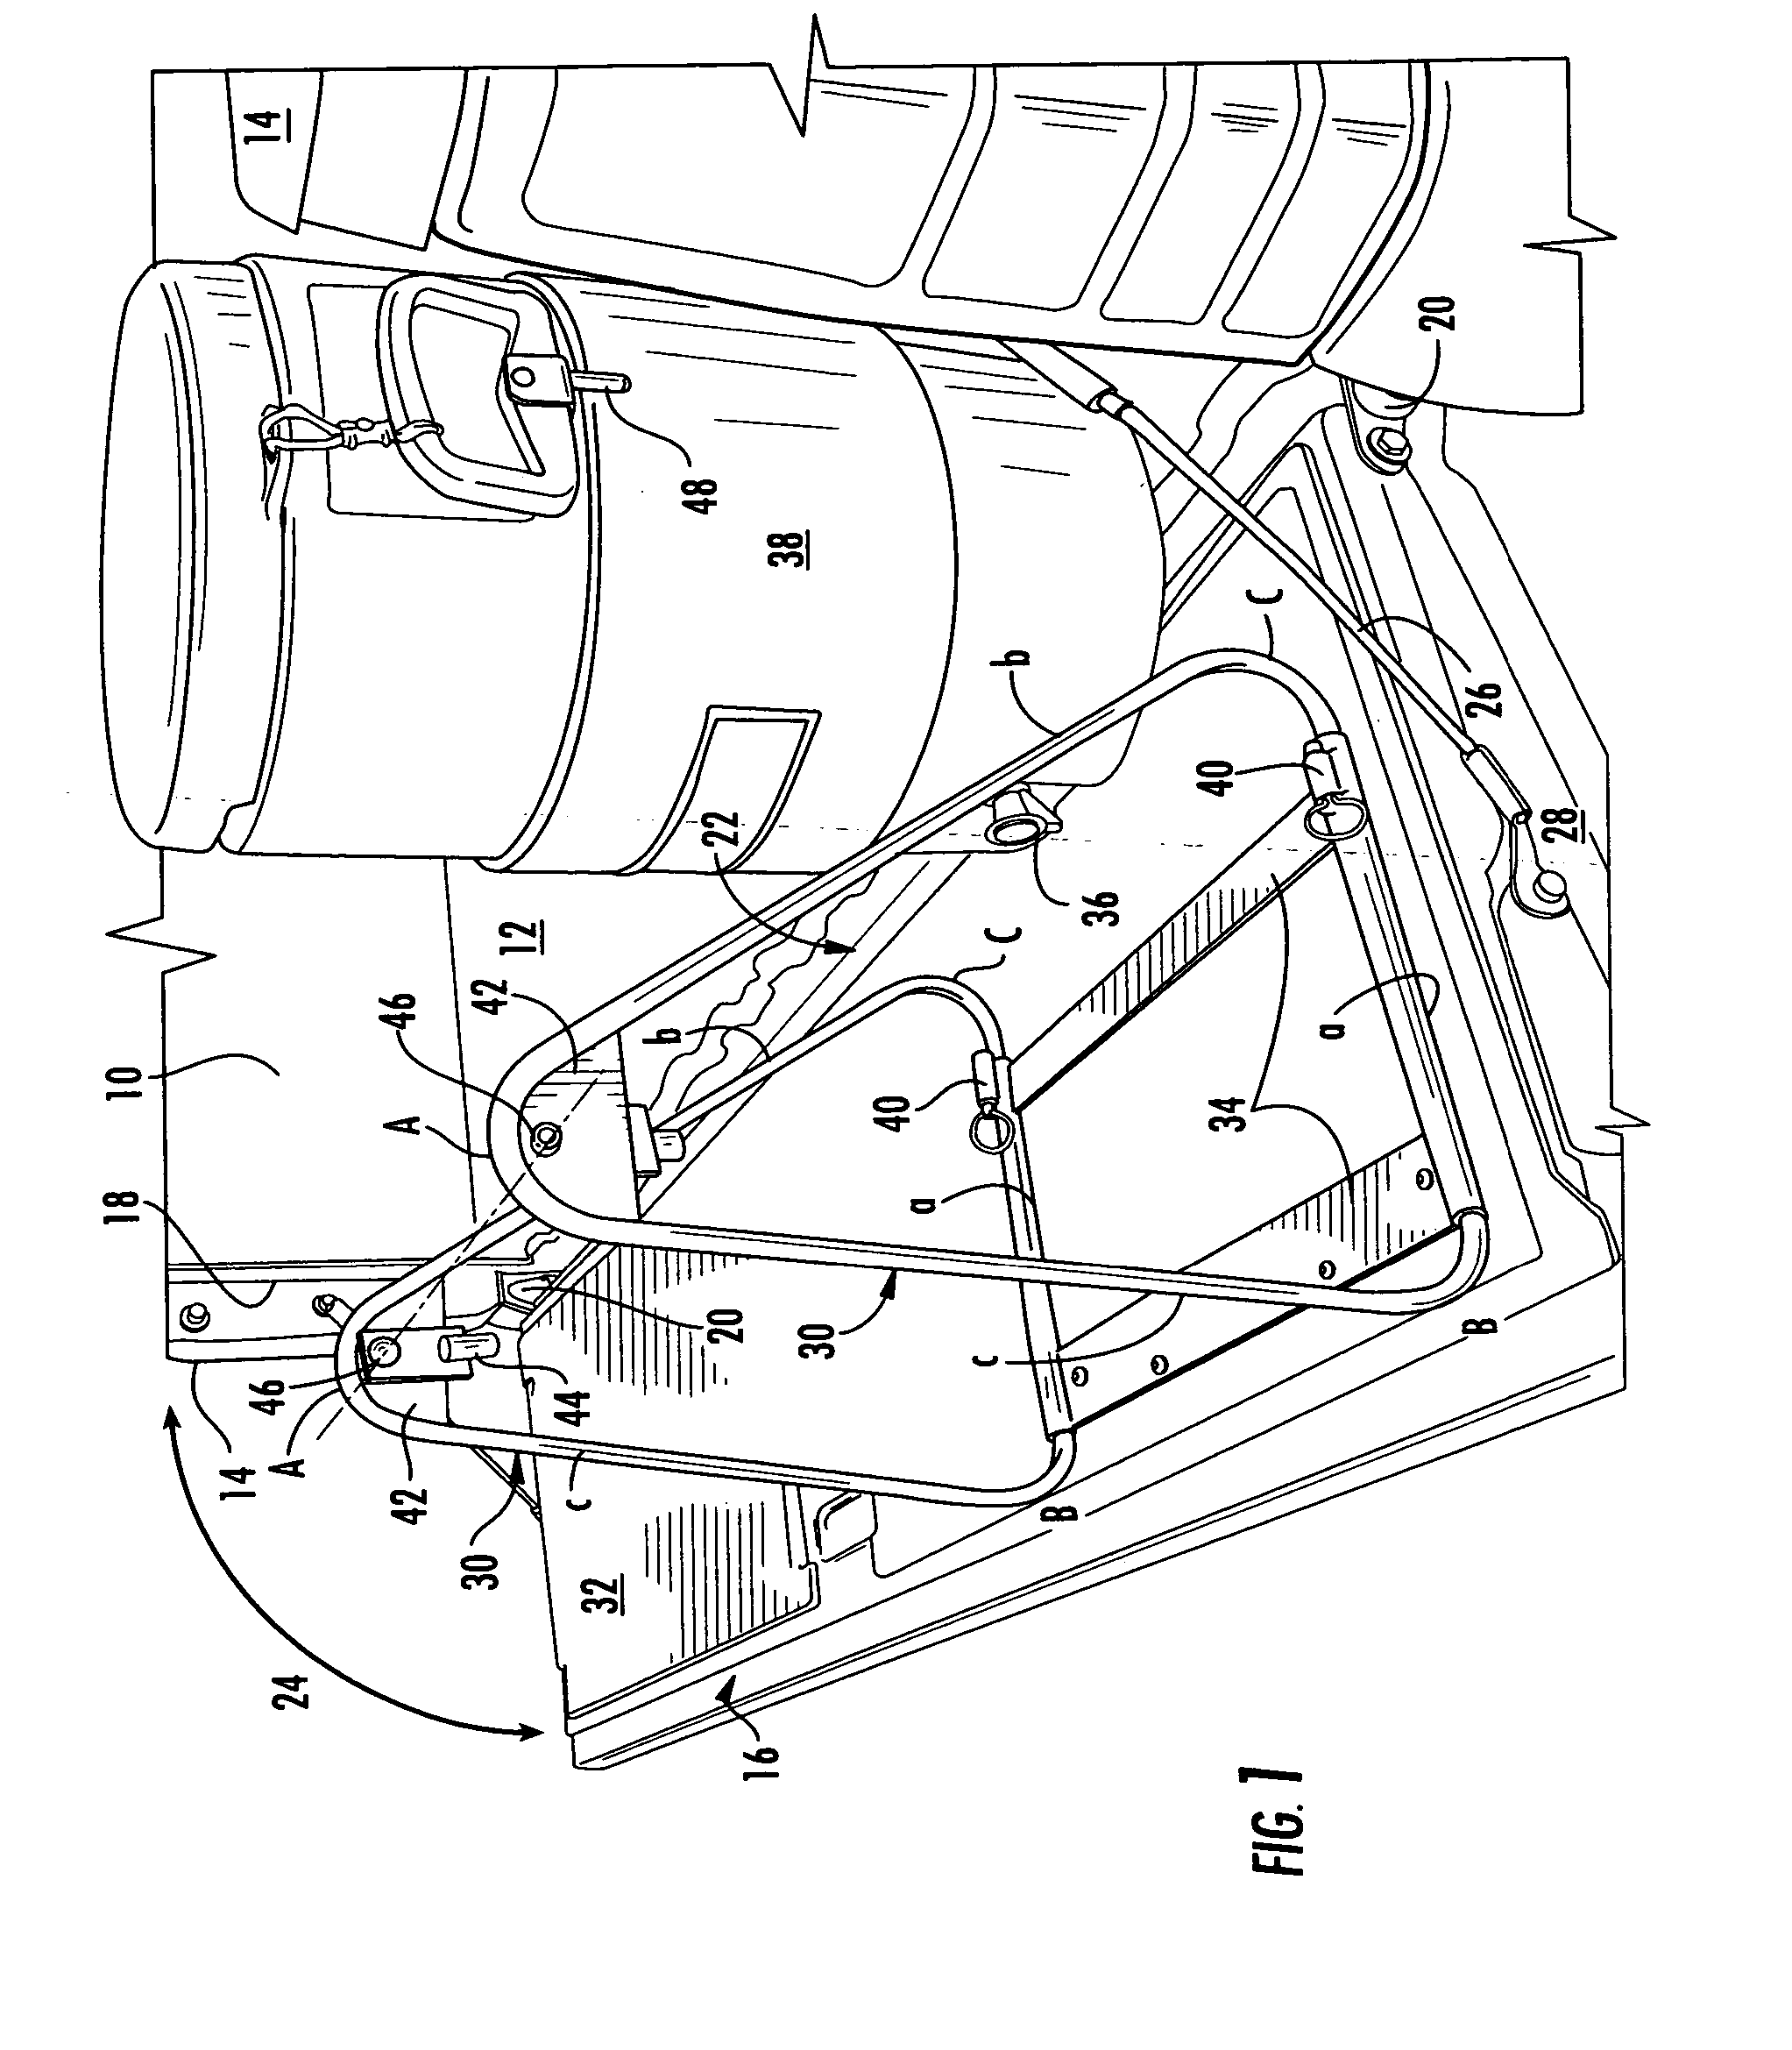 Portable beverage cooler retention device for vehicles with tailgates